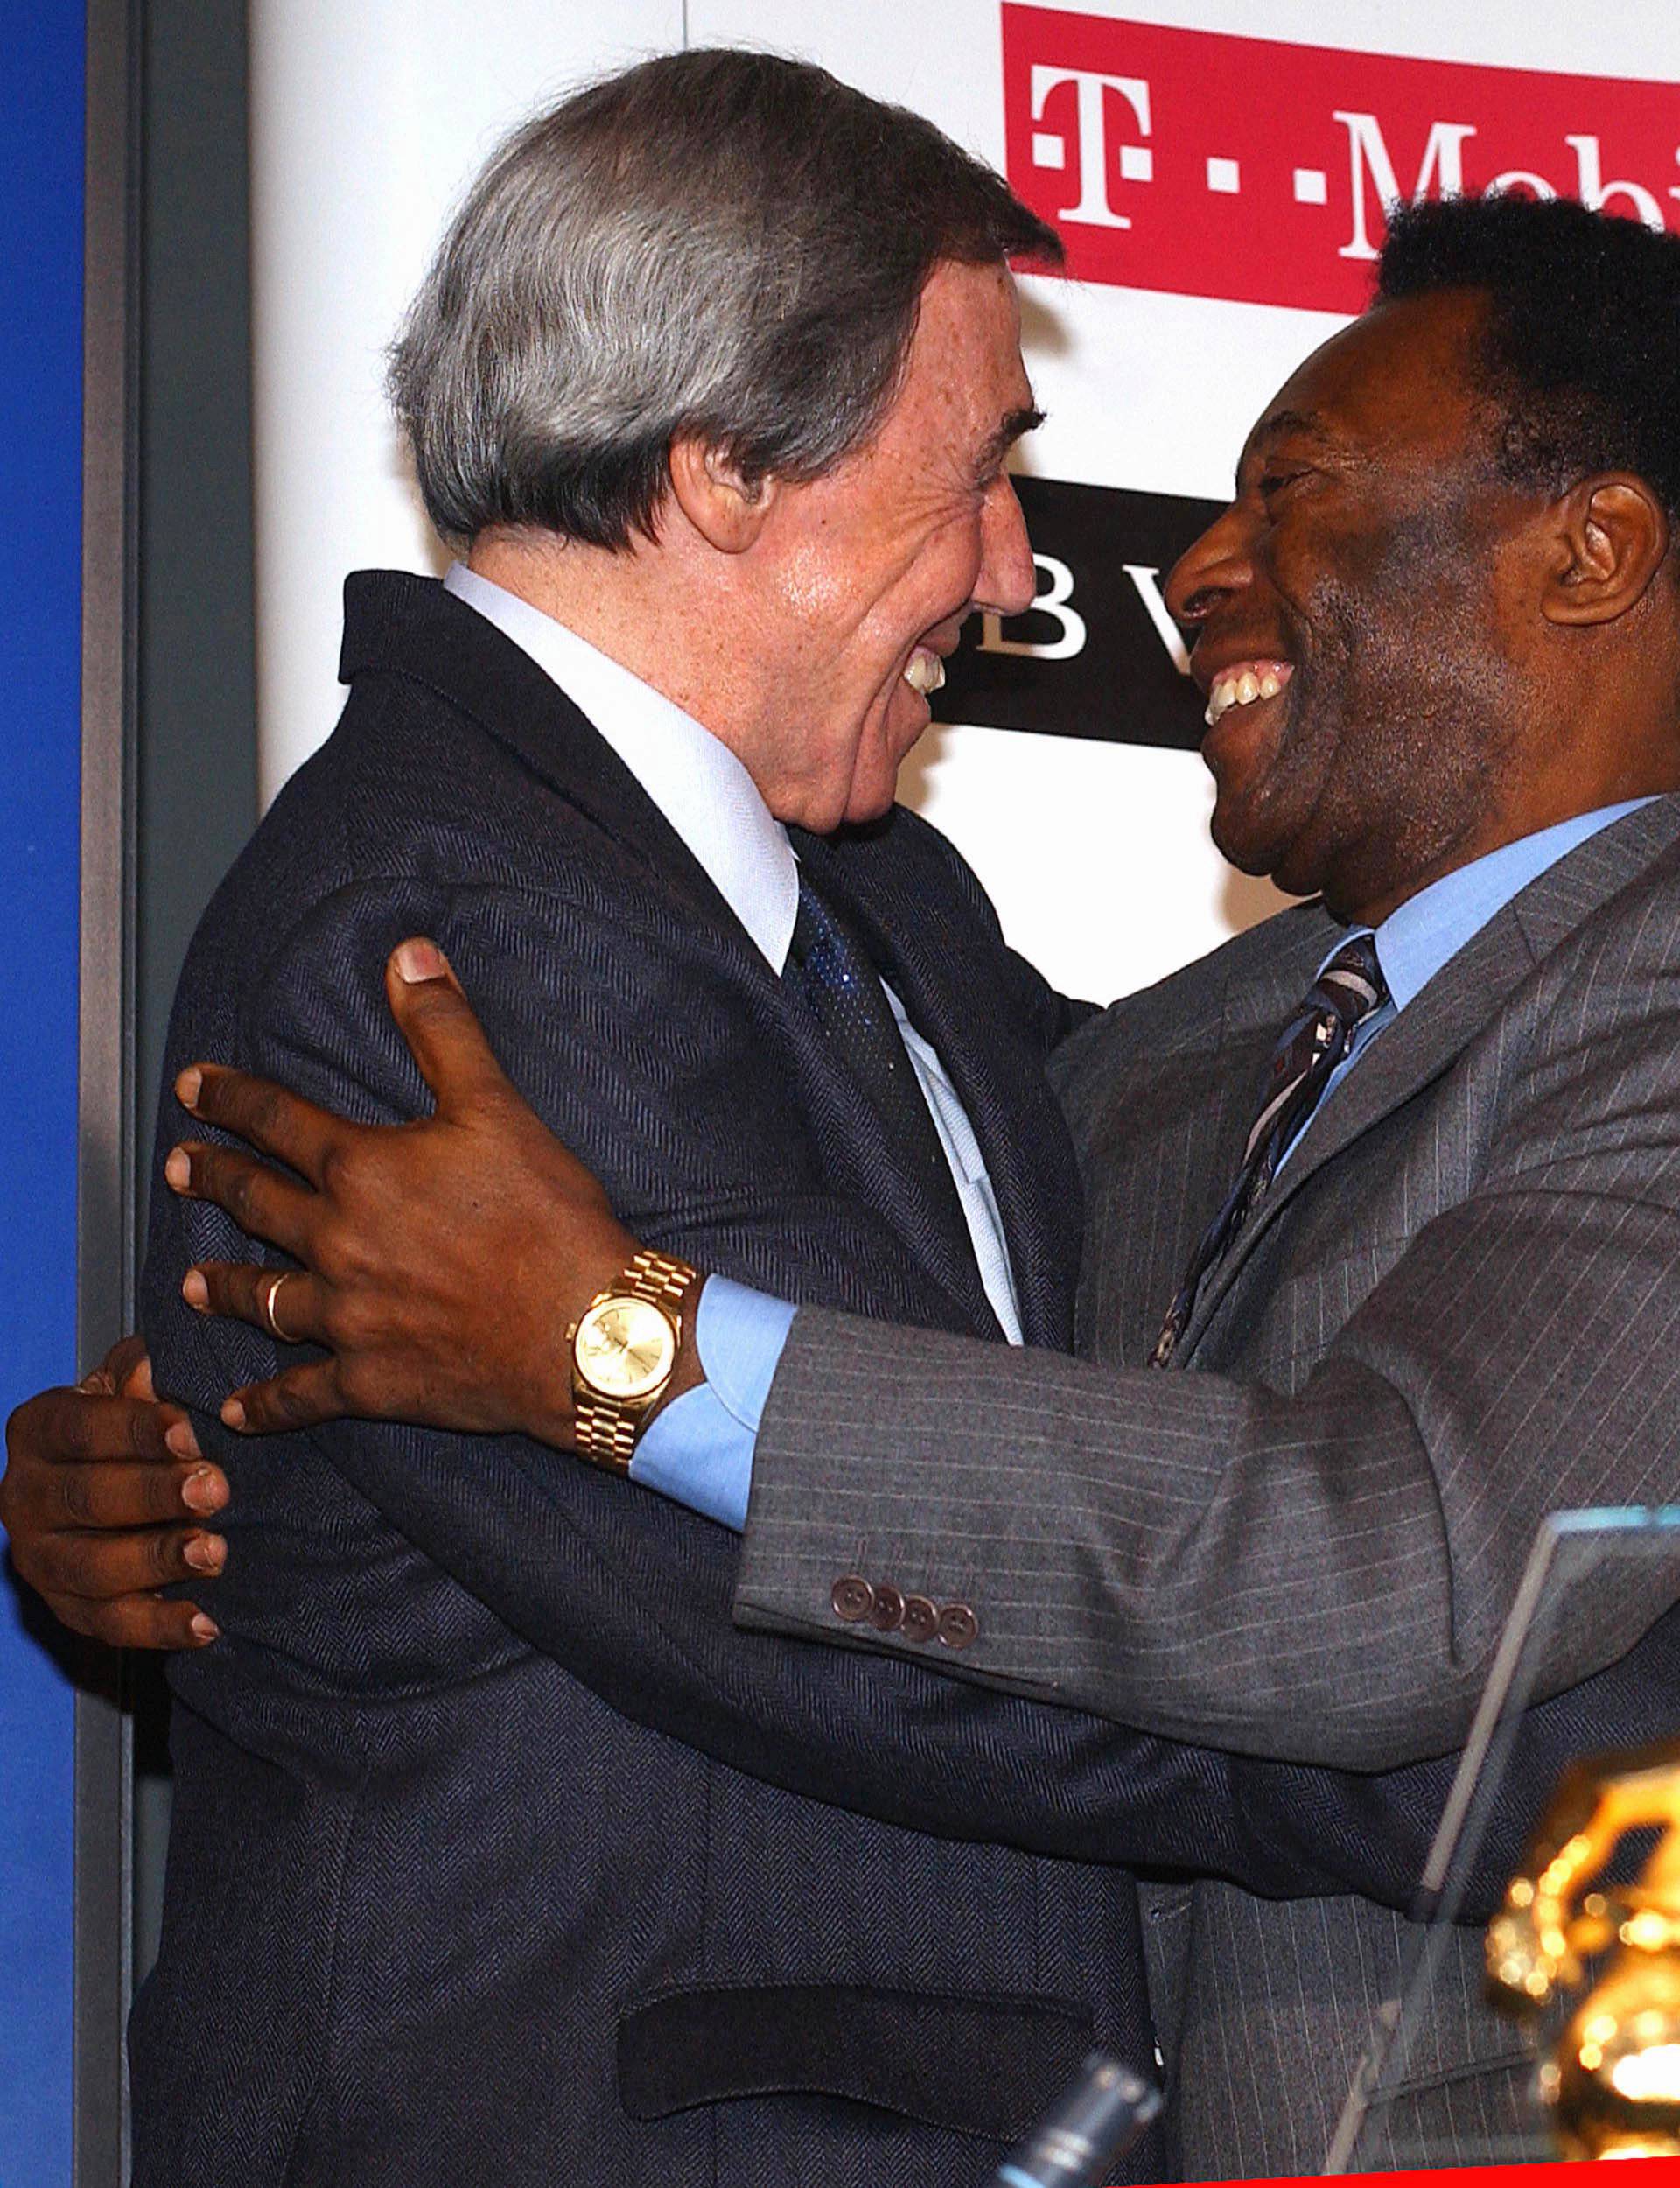 FILE PHOTO: BRAZILIAN FOOTBALL LEGEND PELE AND FORMER ENGLAND GOALKEEPER BANKS EMBRACE AS THEY MEET AT A NEWS ...